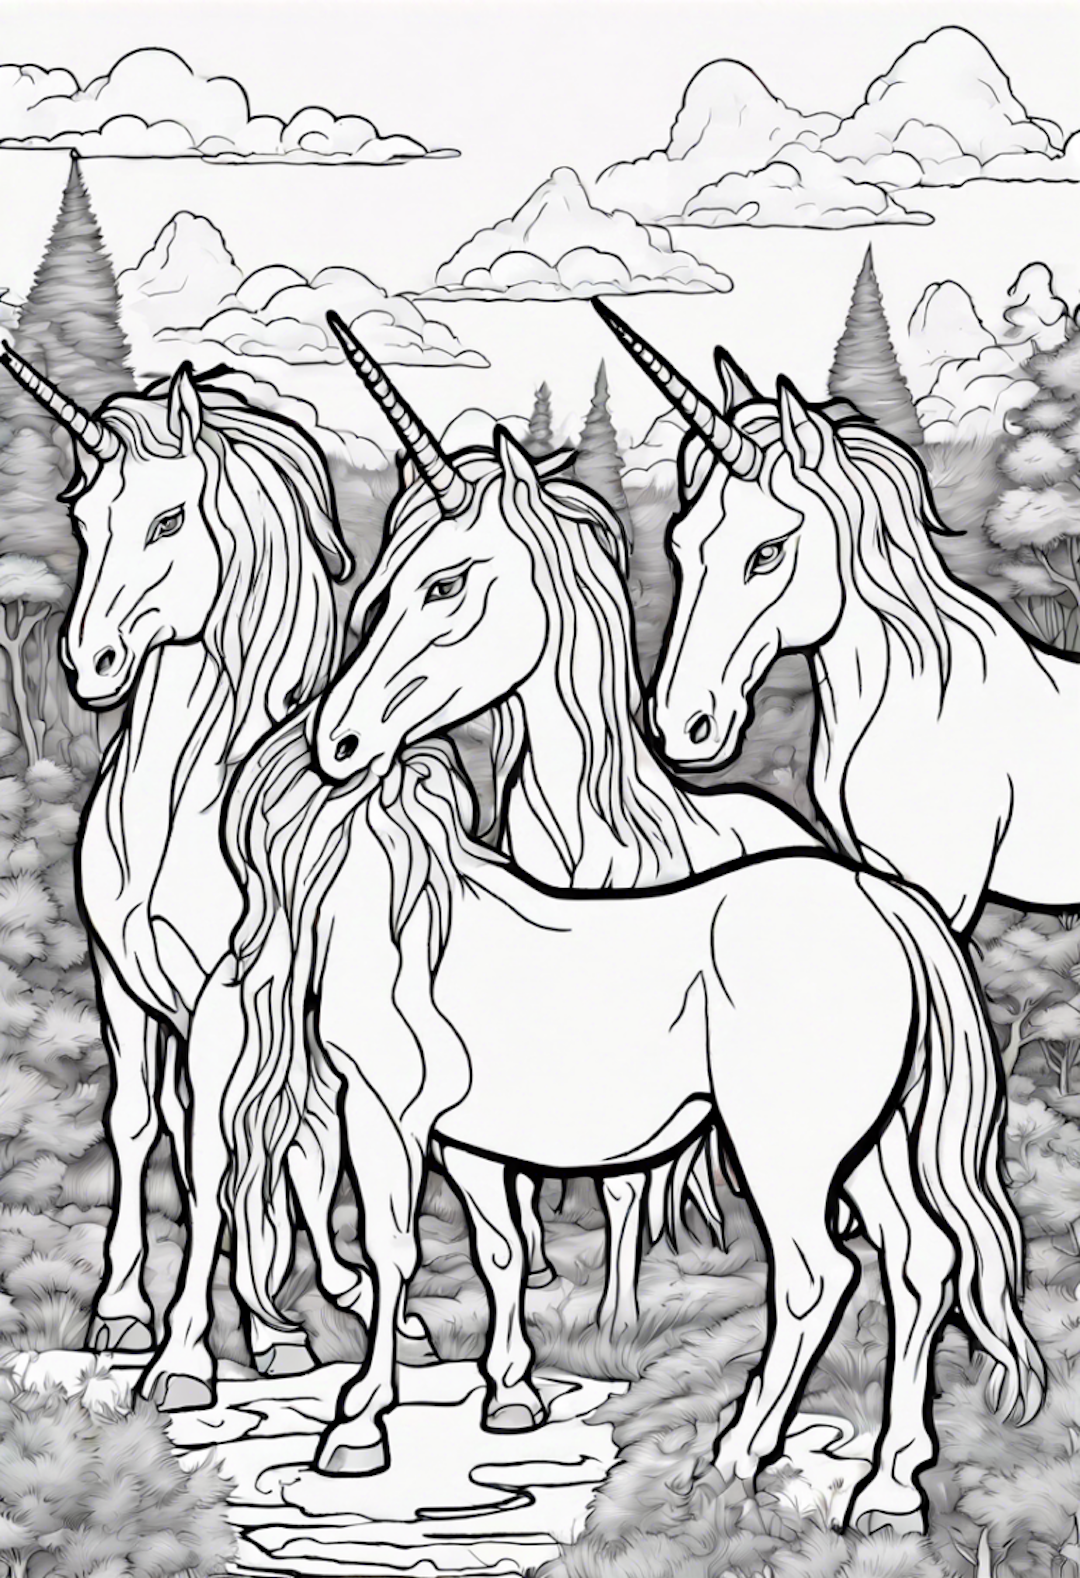 Enchanted Unicorn Gathering in Mystical Forest coloring pages